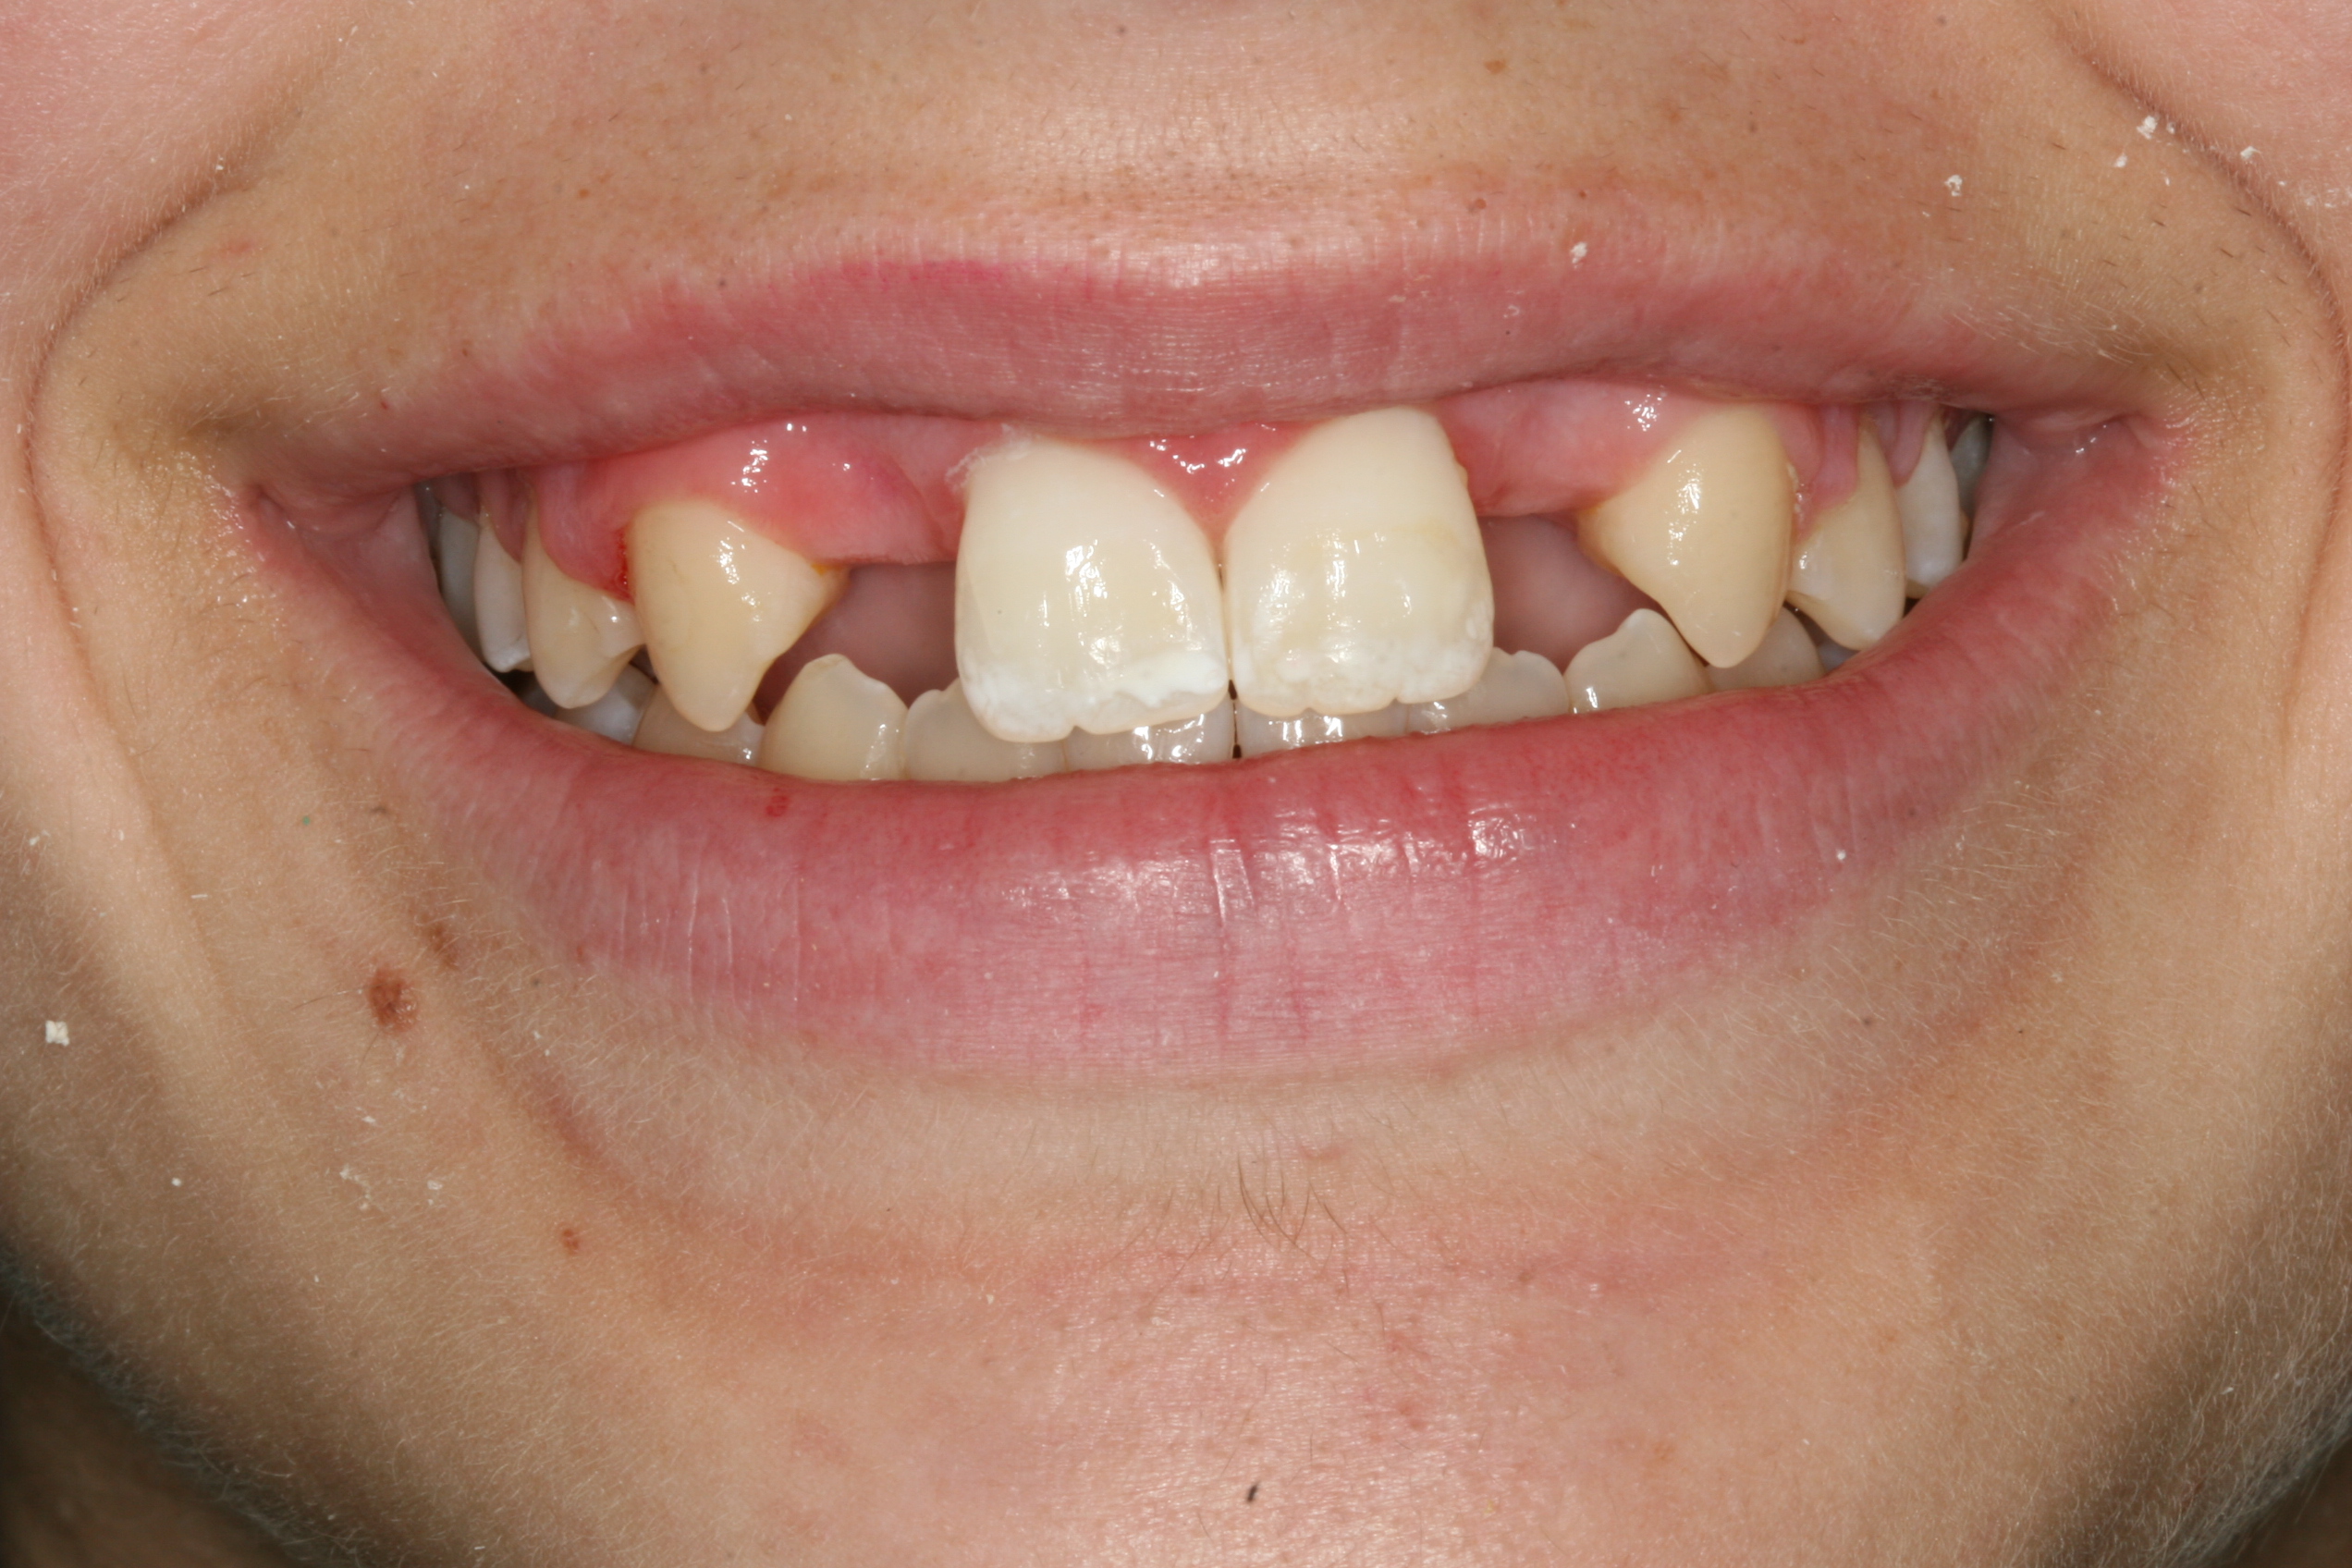 Close up image of teeth missing lateral incisors